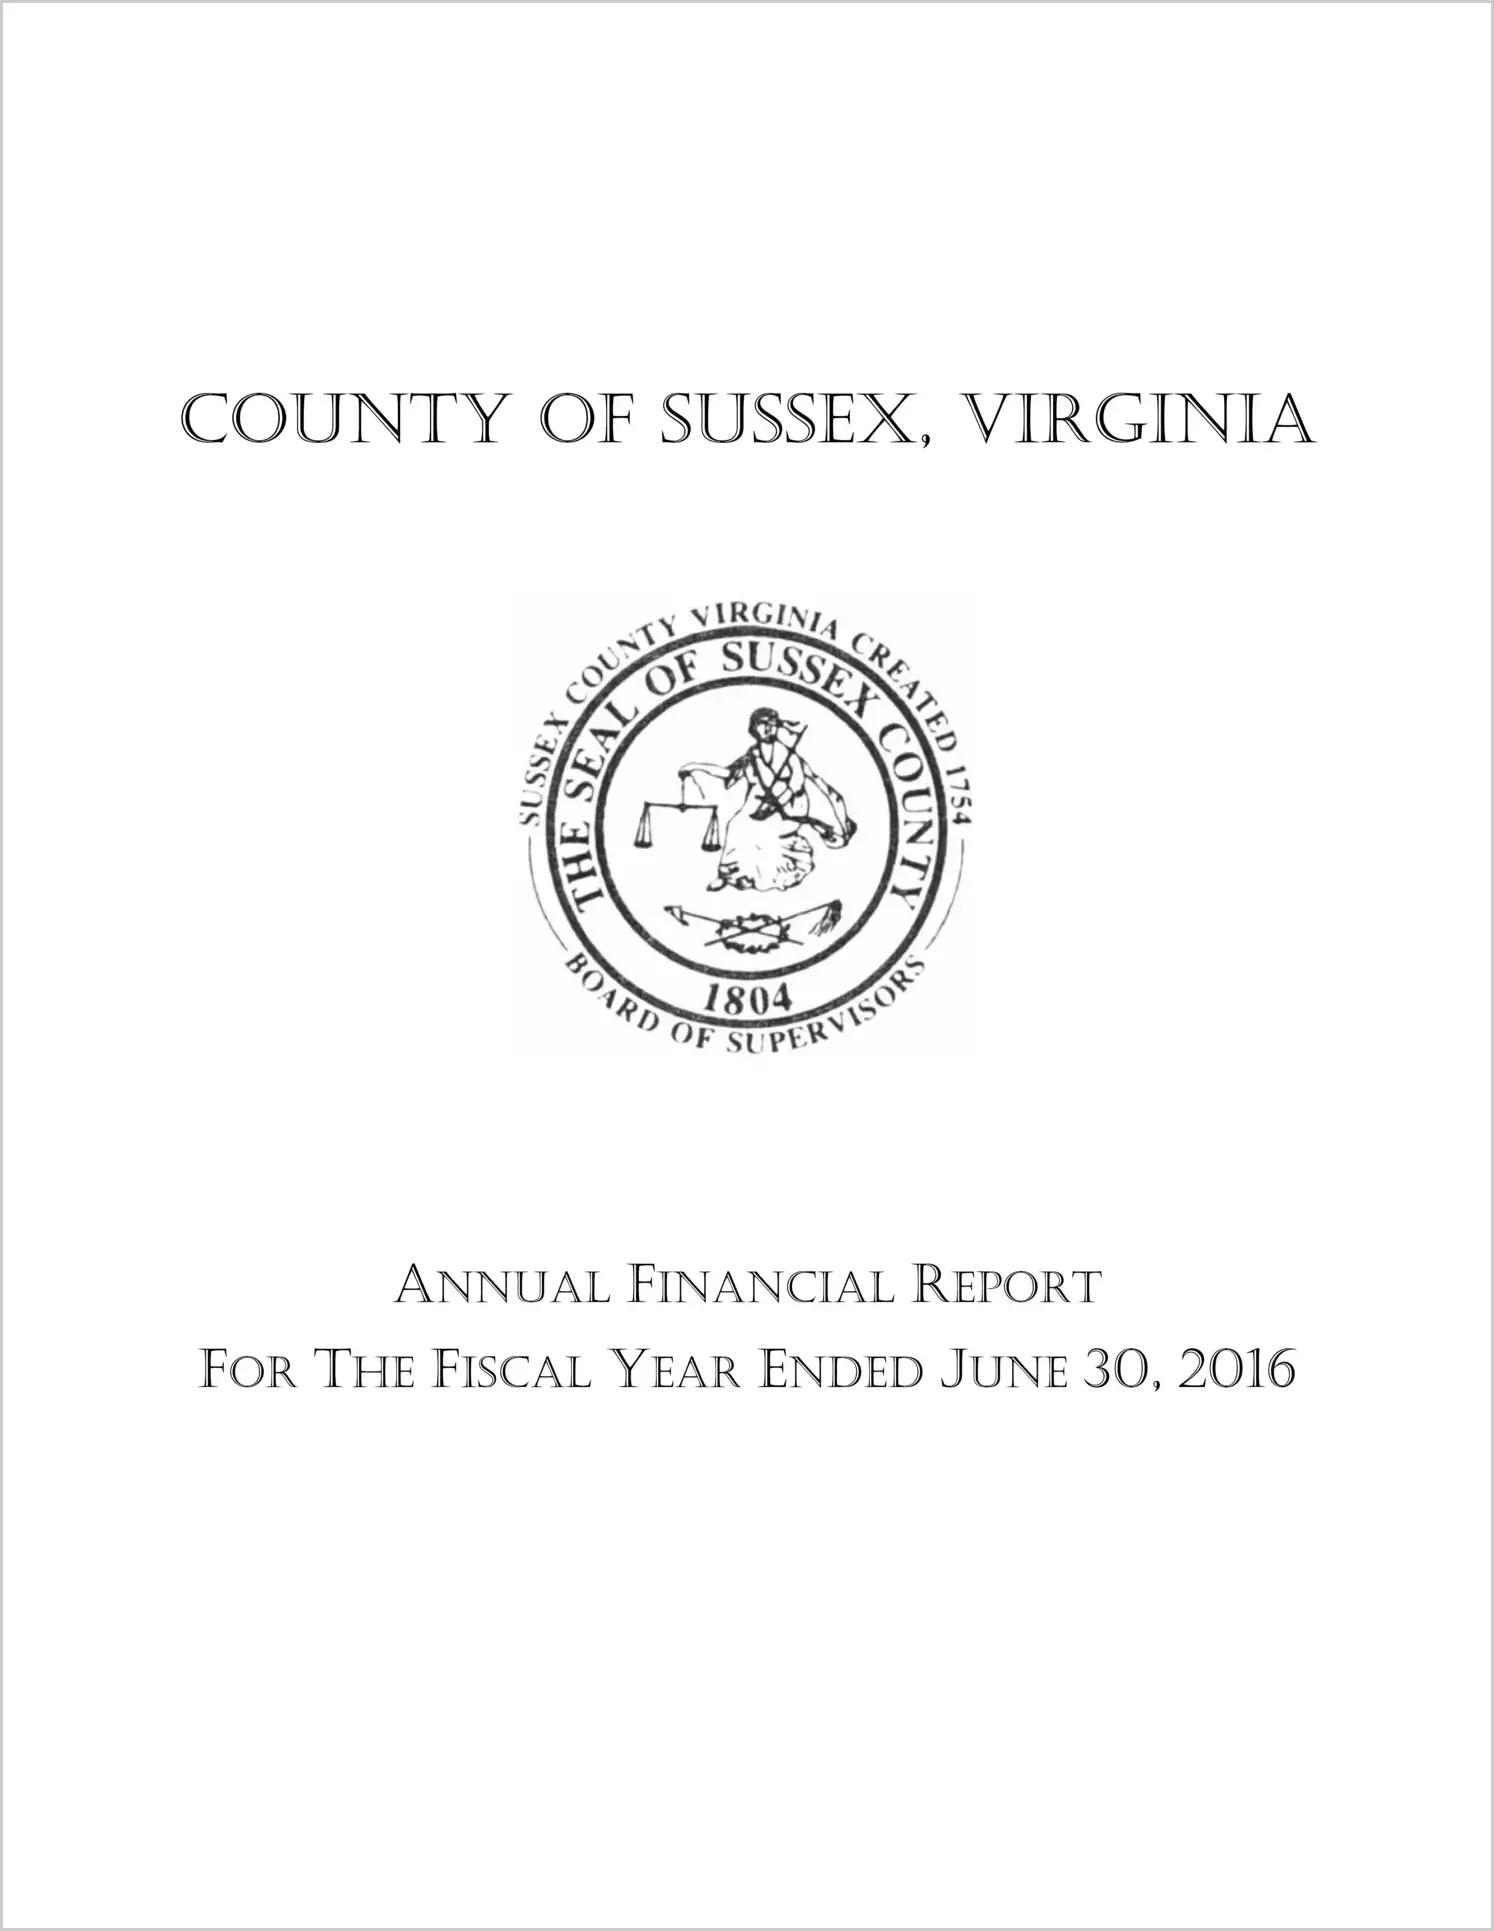 2016 Annual Financial Report for County of Sussex